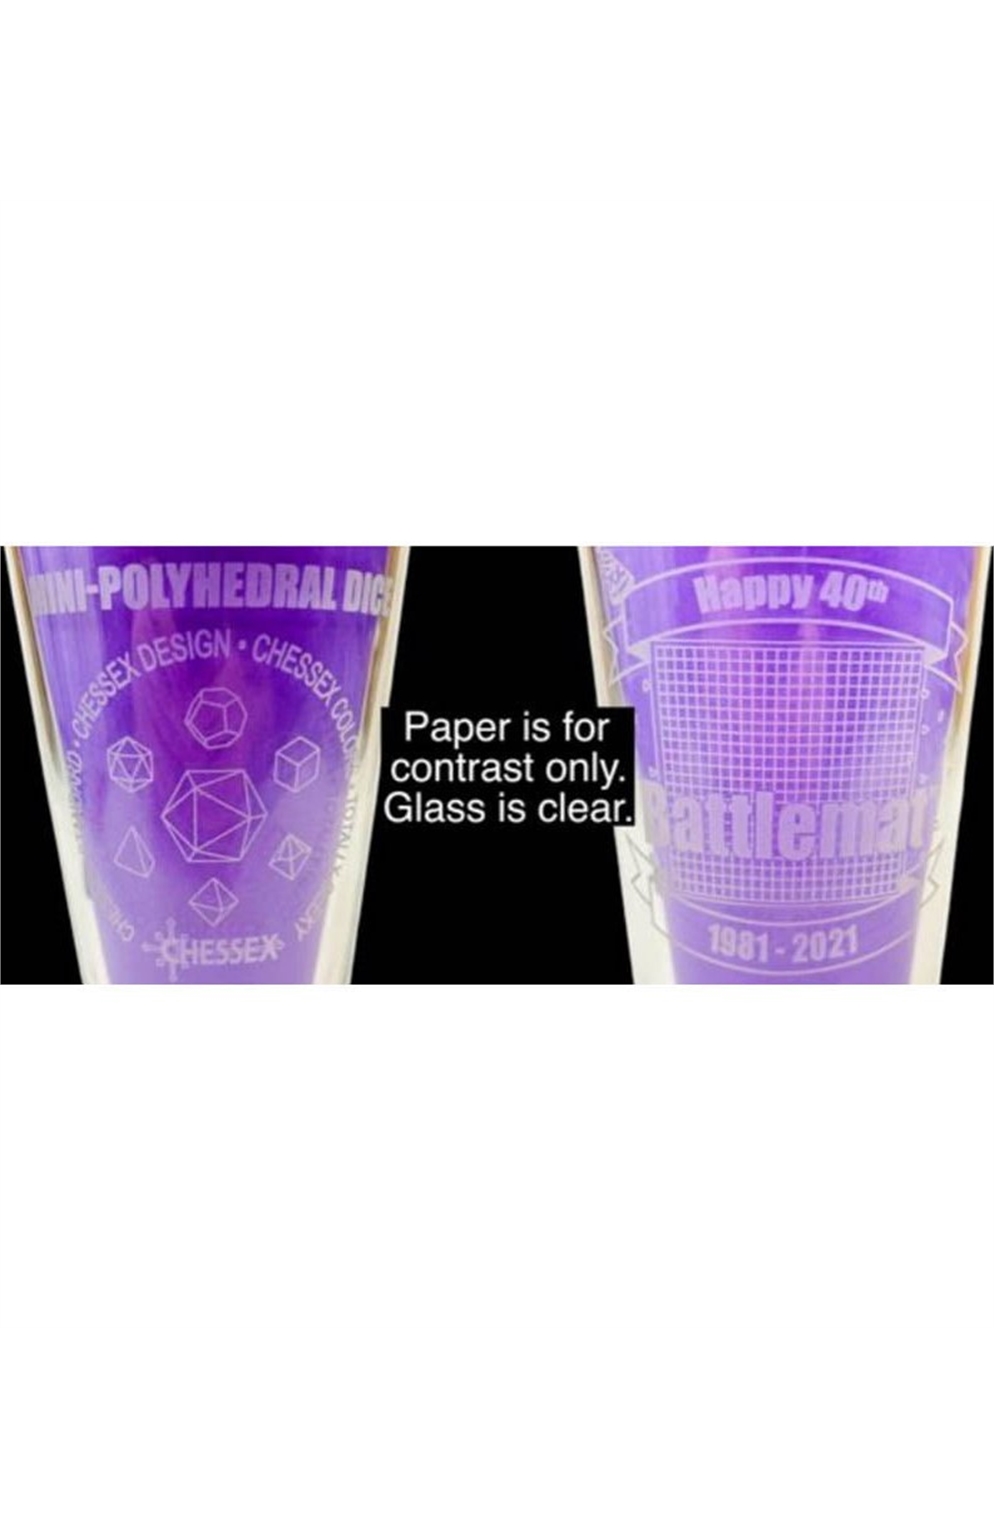 Chessex Mini-Poly Battlemat Anniversary Limited Edition Pint Glass